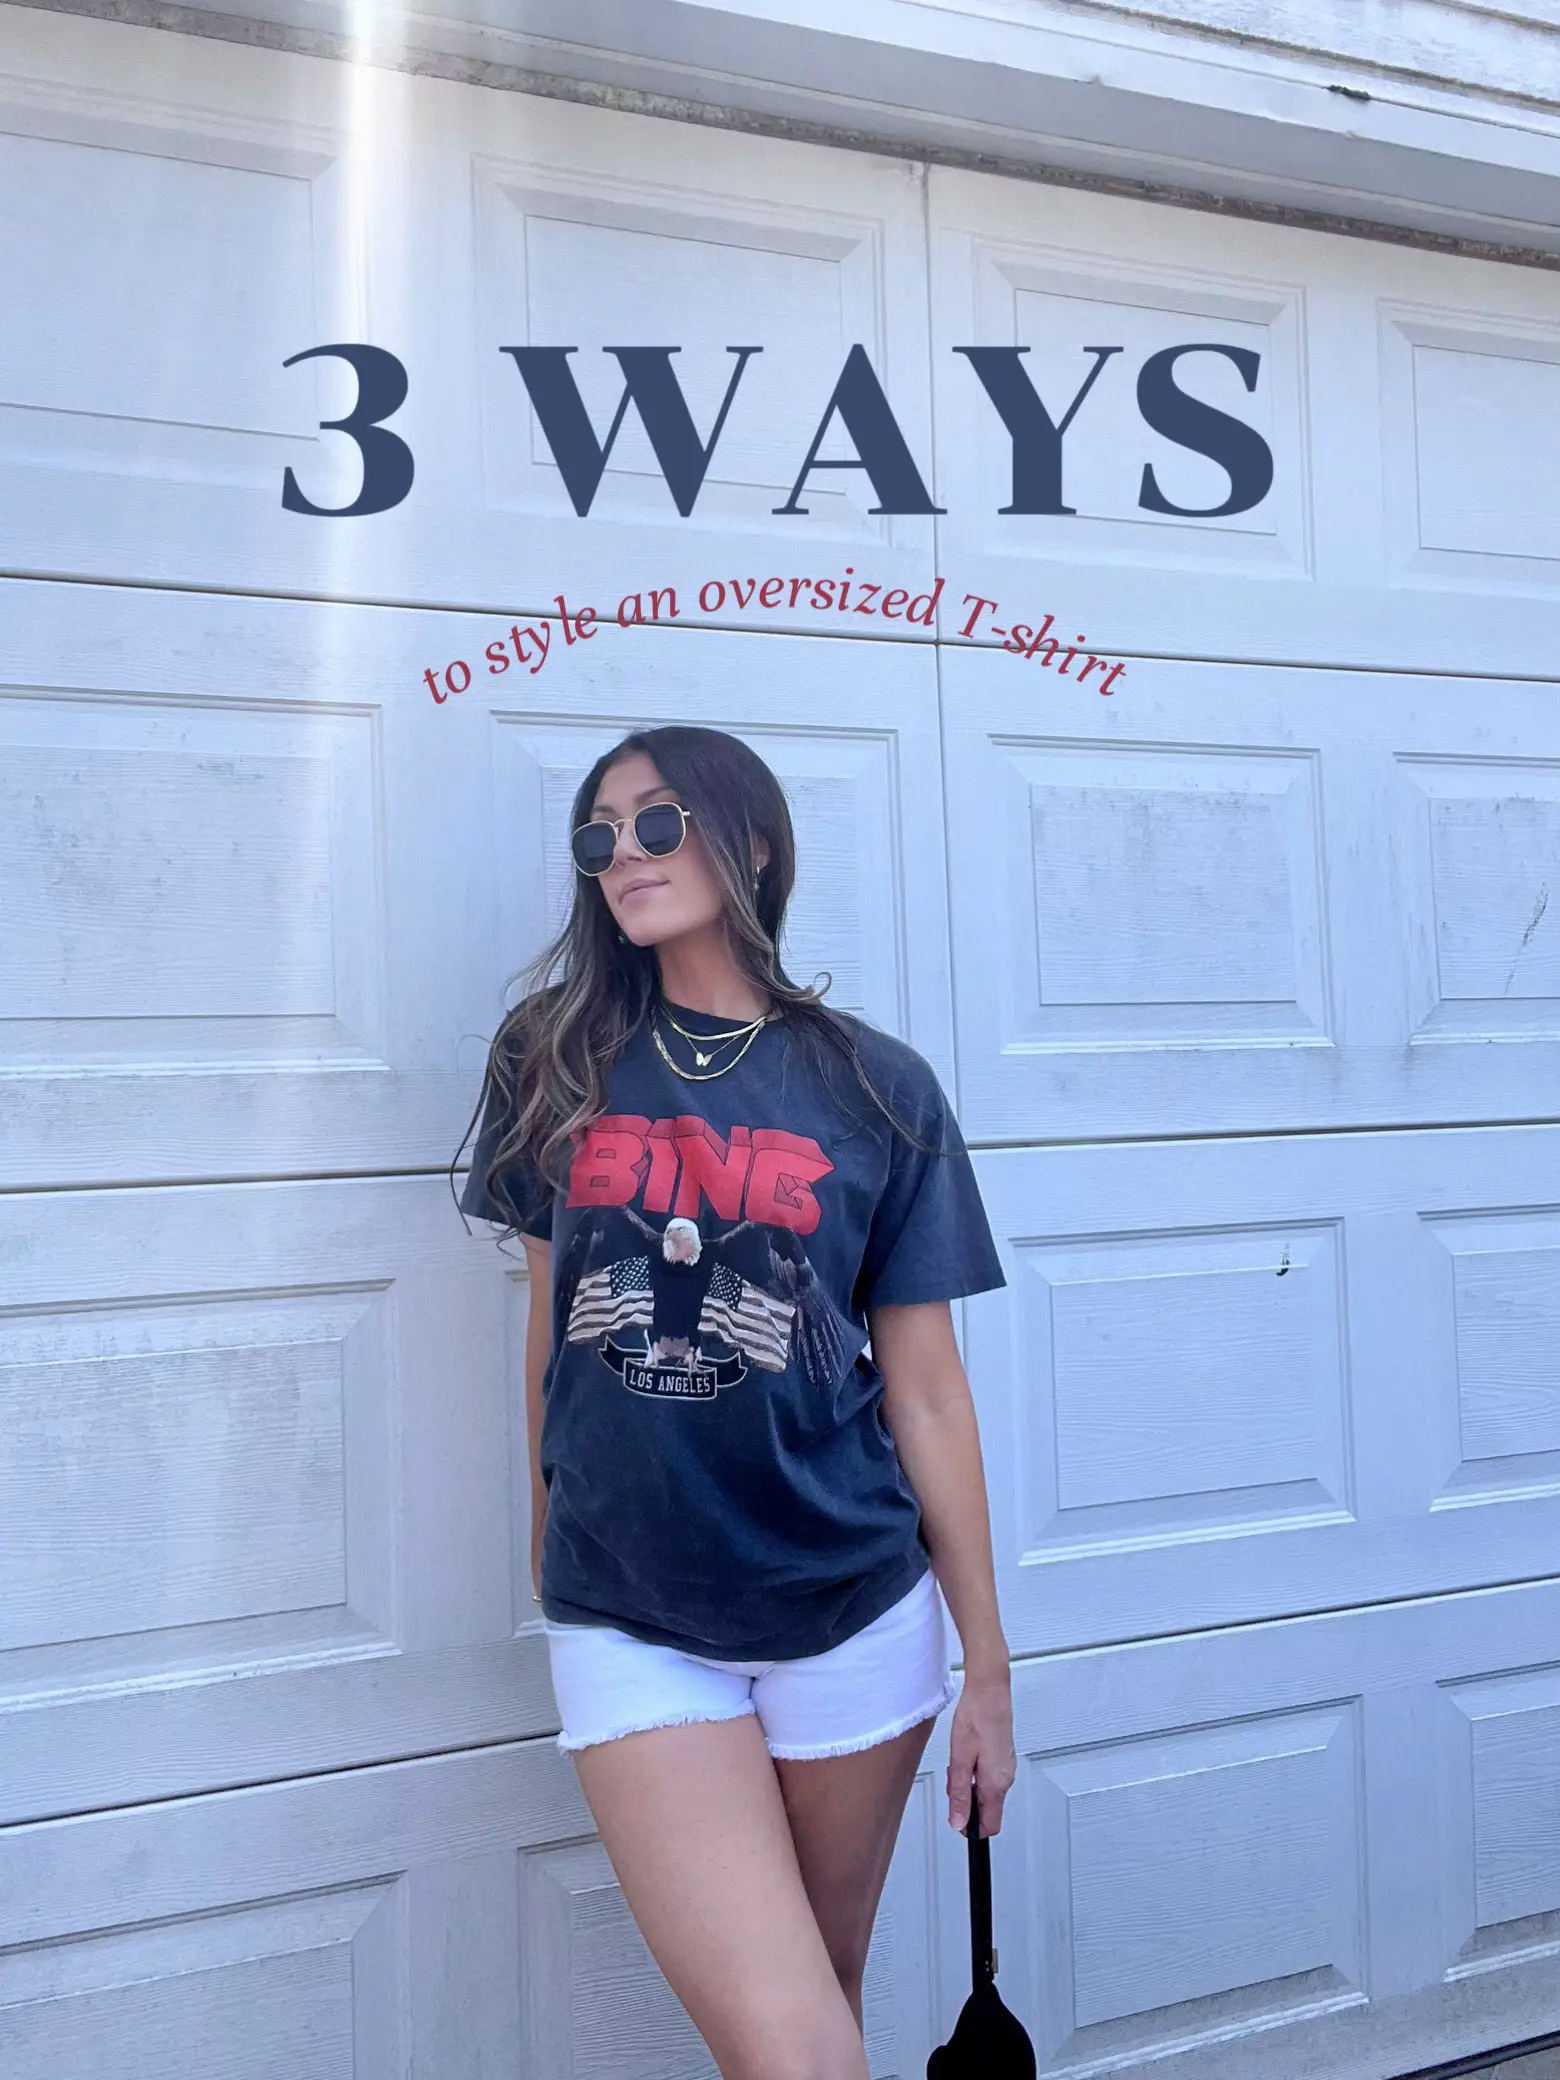 7 WAYS TO TUCK IN YOUR OVERSIZED TOPS  styling thrifted oversized tees,  sweaters, & sweatshirts 